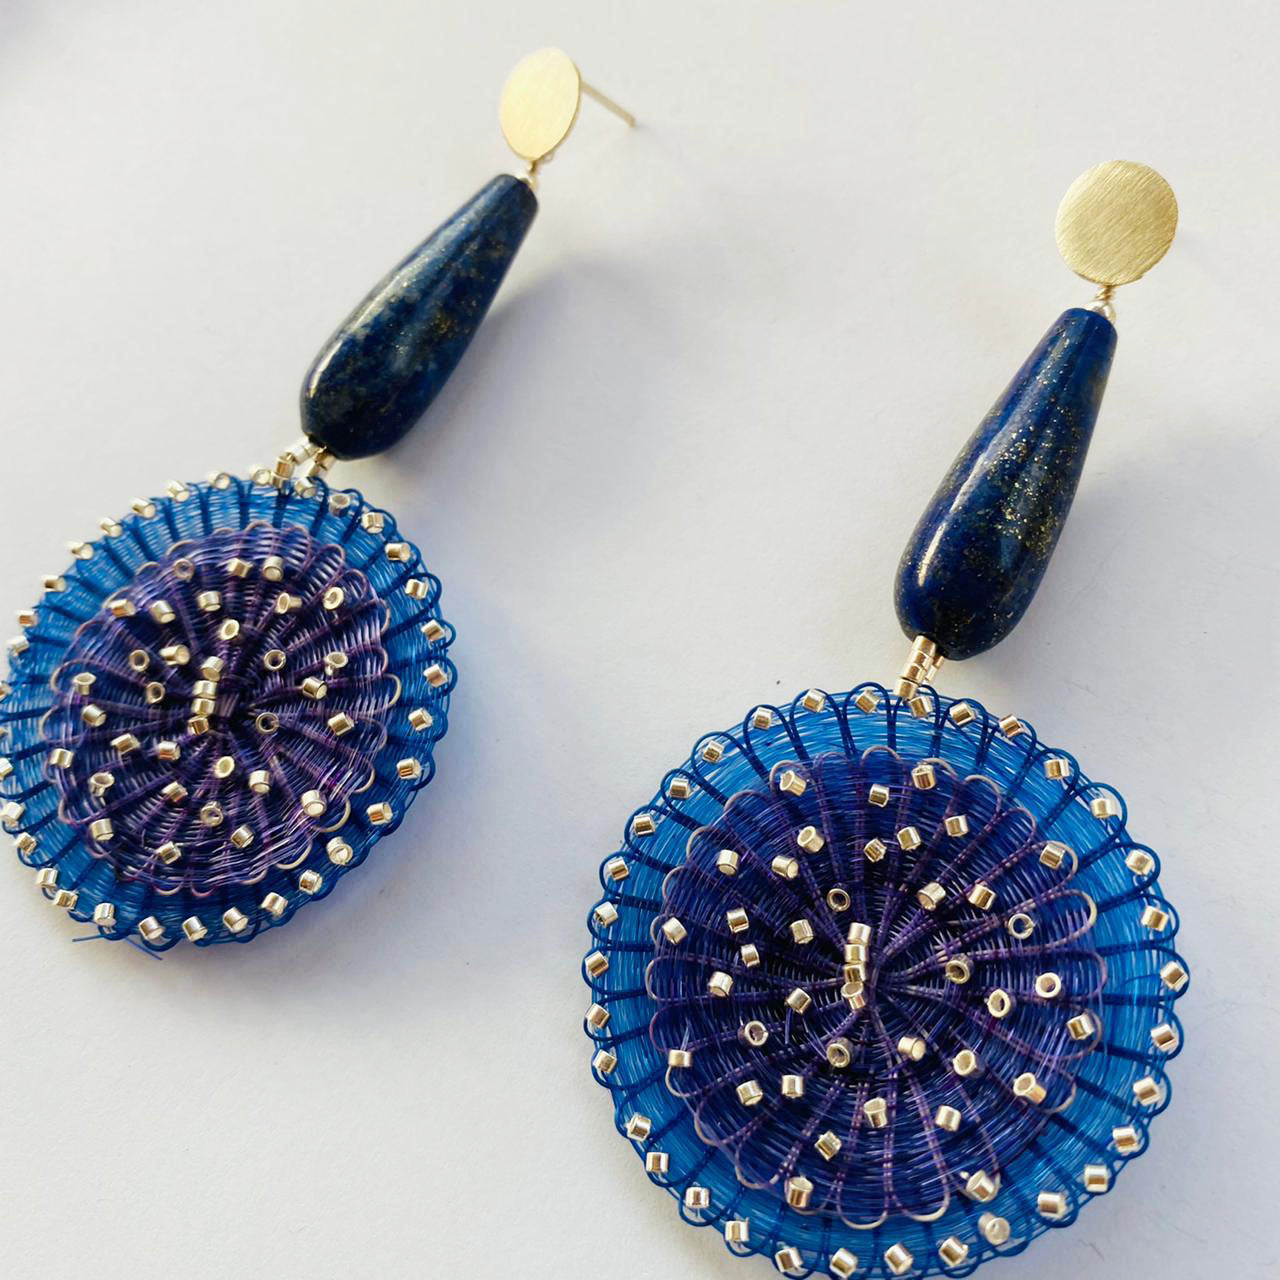 Crin Earrings with Silver Beads and Lapis by Chantal Bernsau- Blue